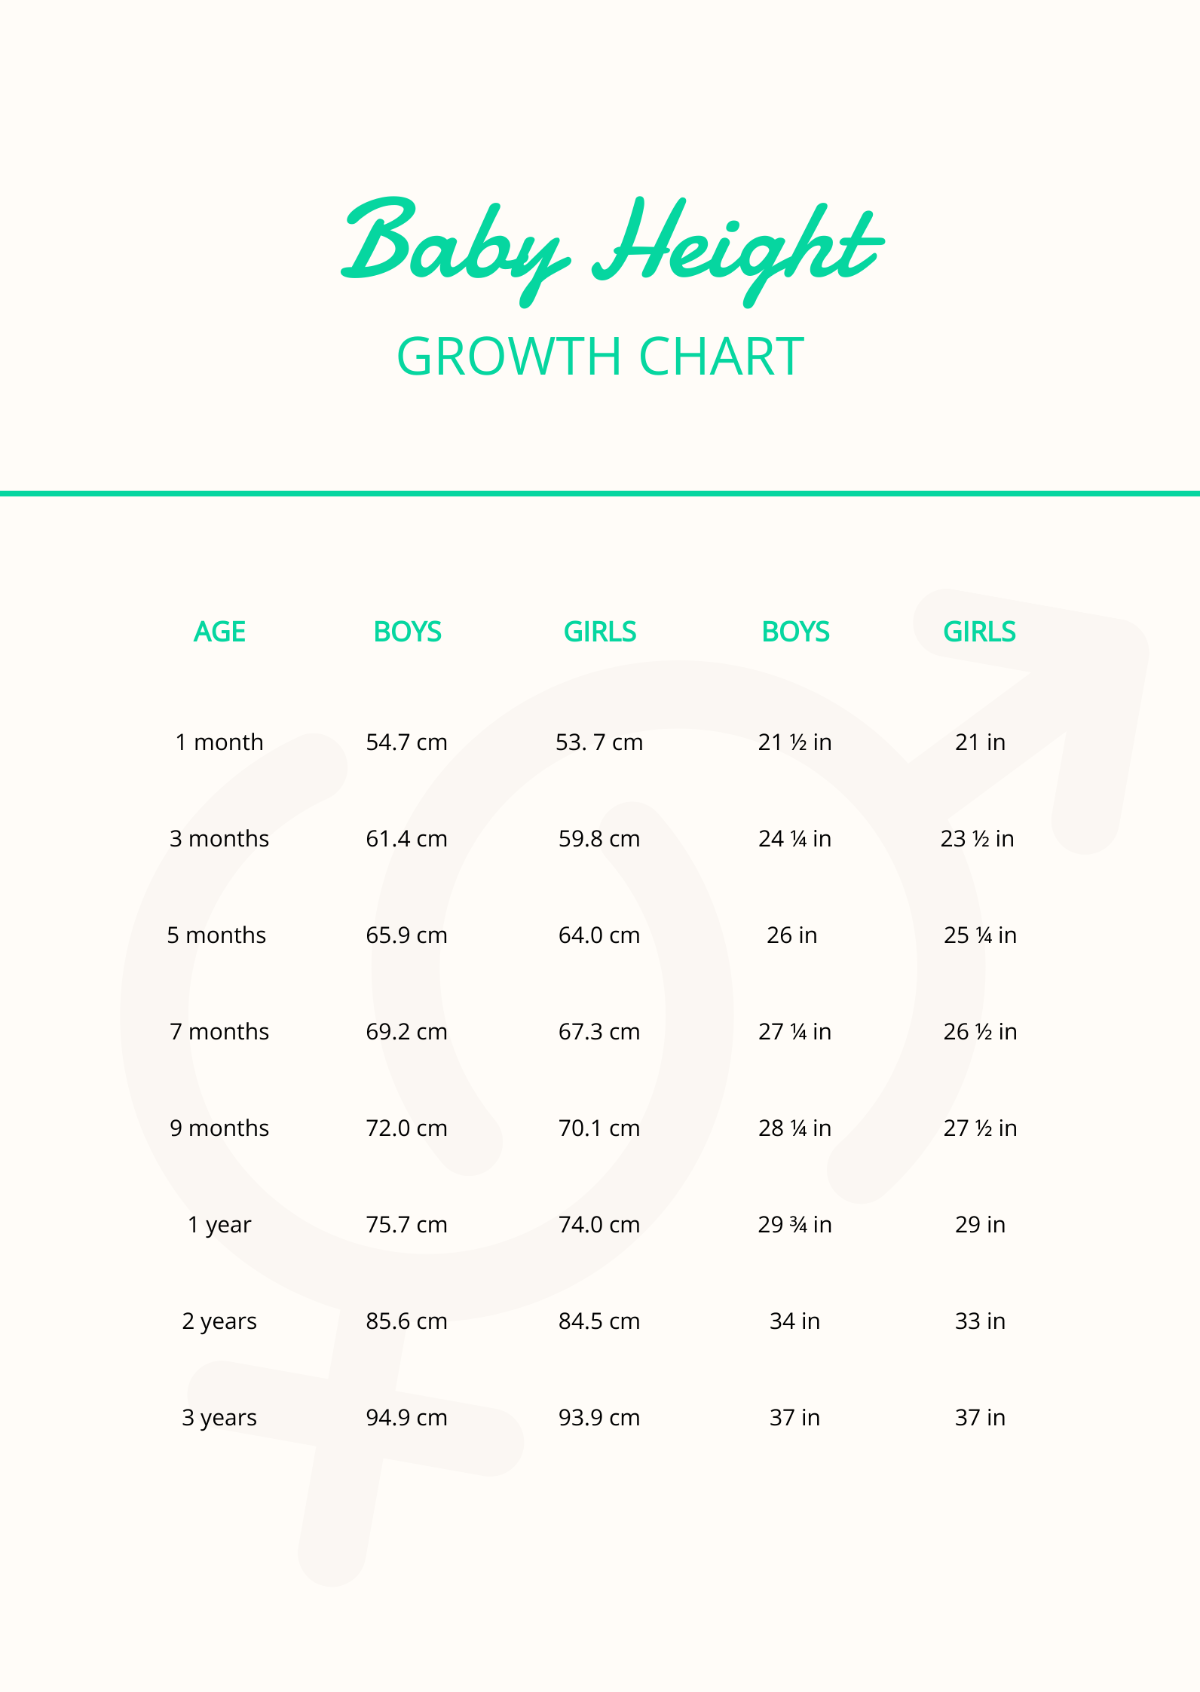 Baby Height Growth Chart Template